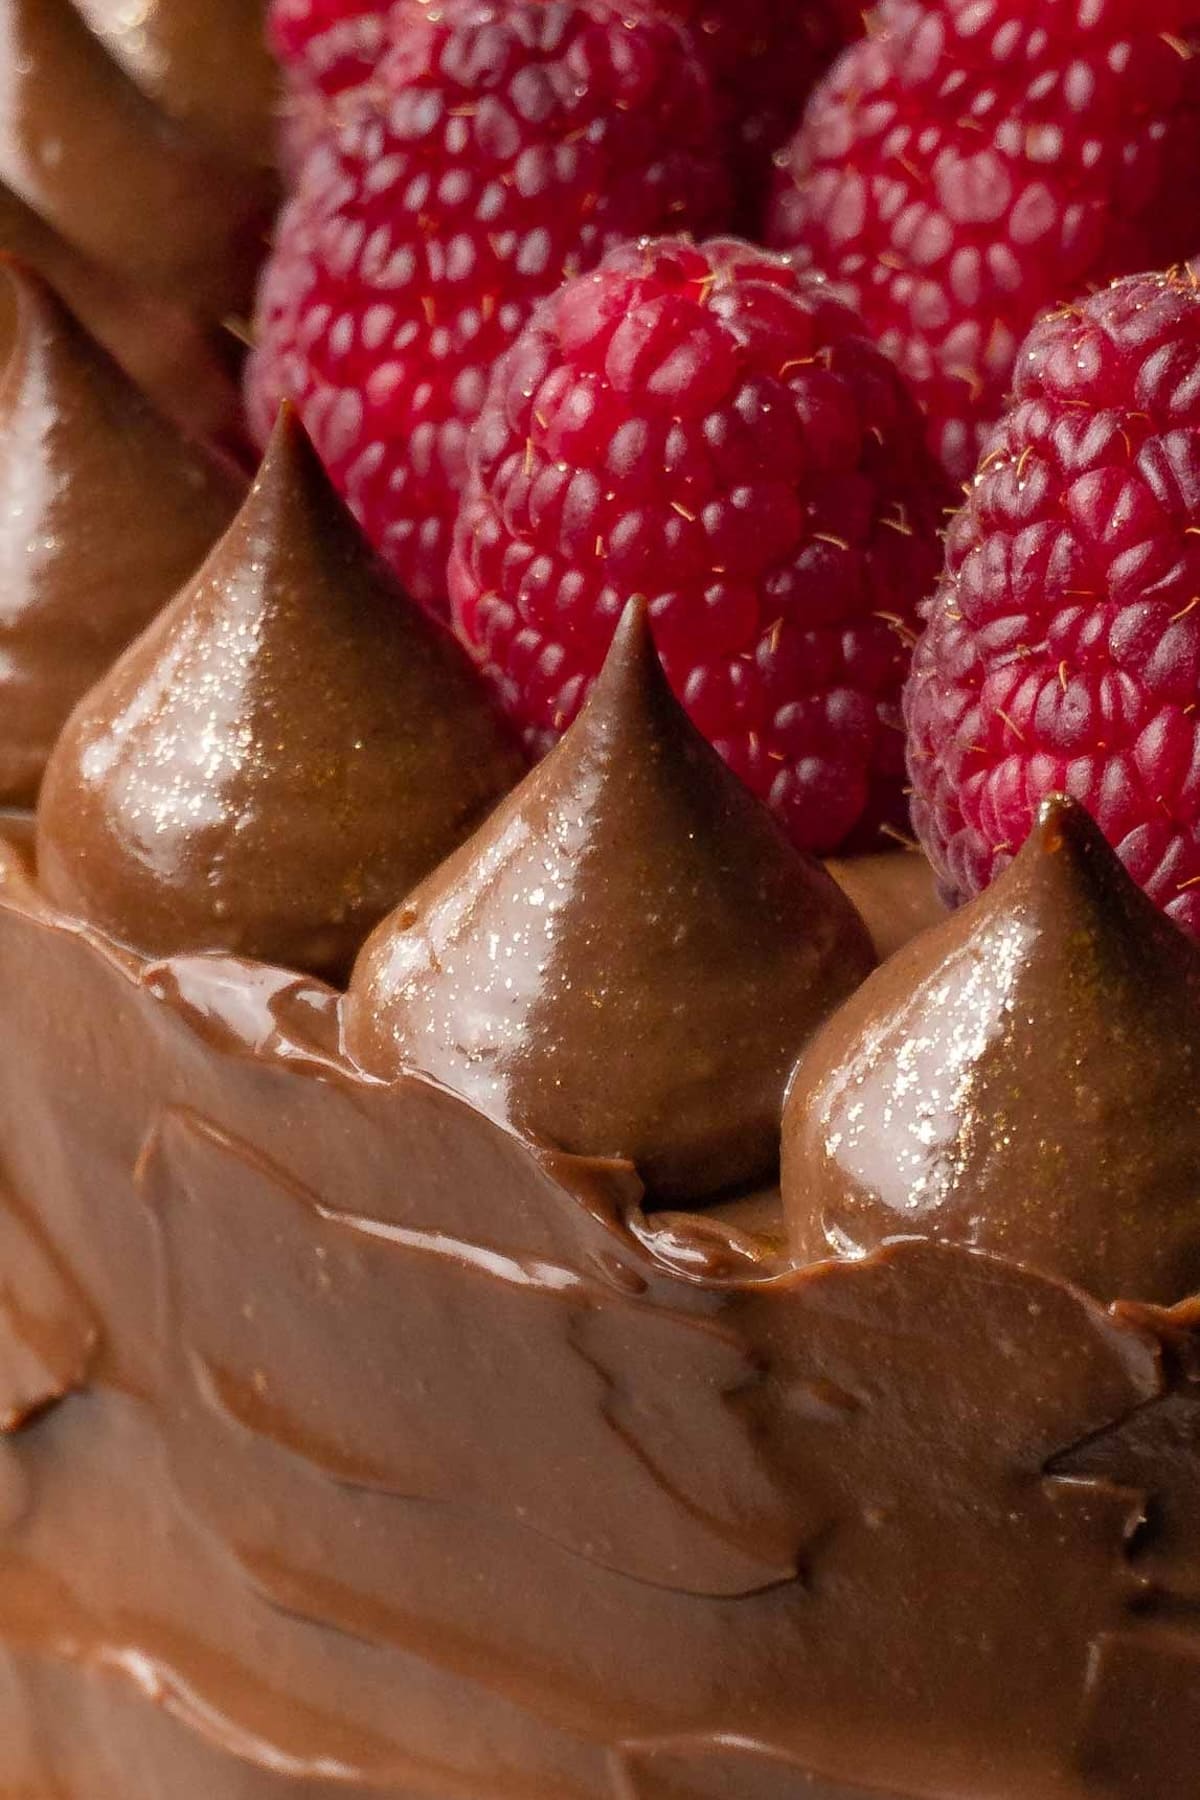 The top of the cake is decorated with chocolate cream piped elements and fresh raspberries.